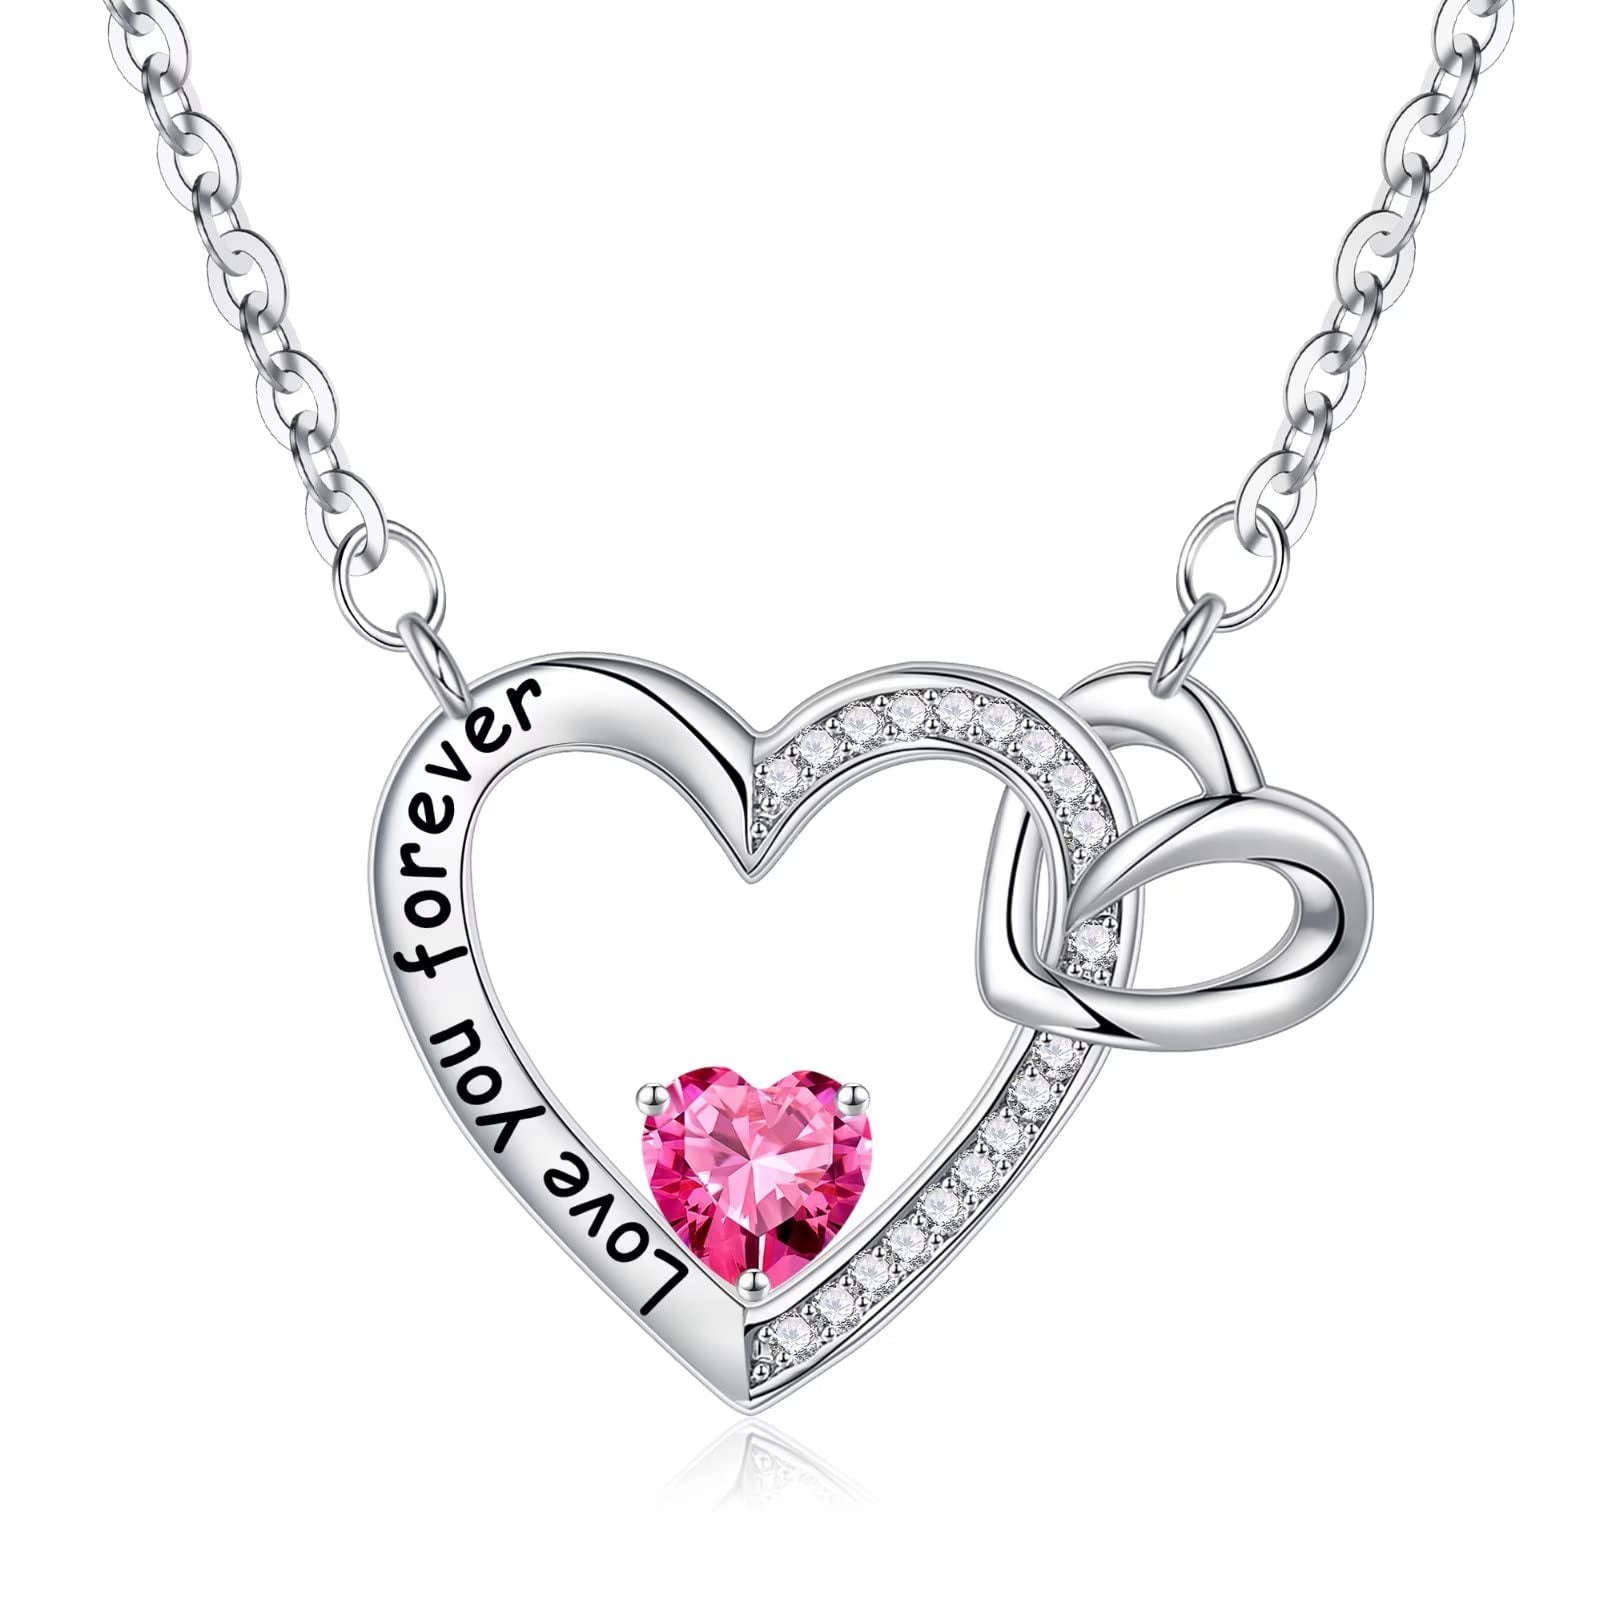 10 Great Mother's Day Necklaces